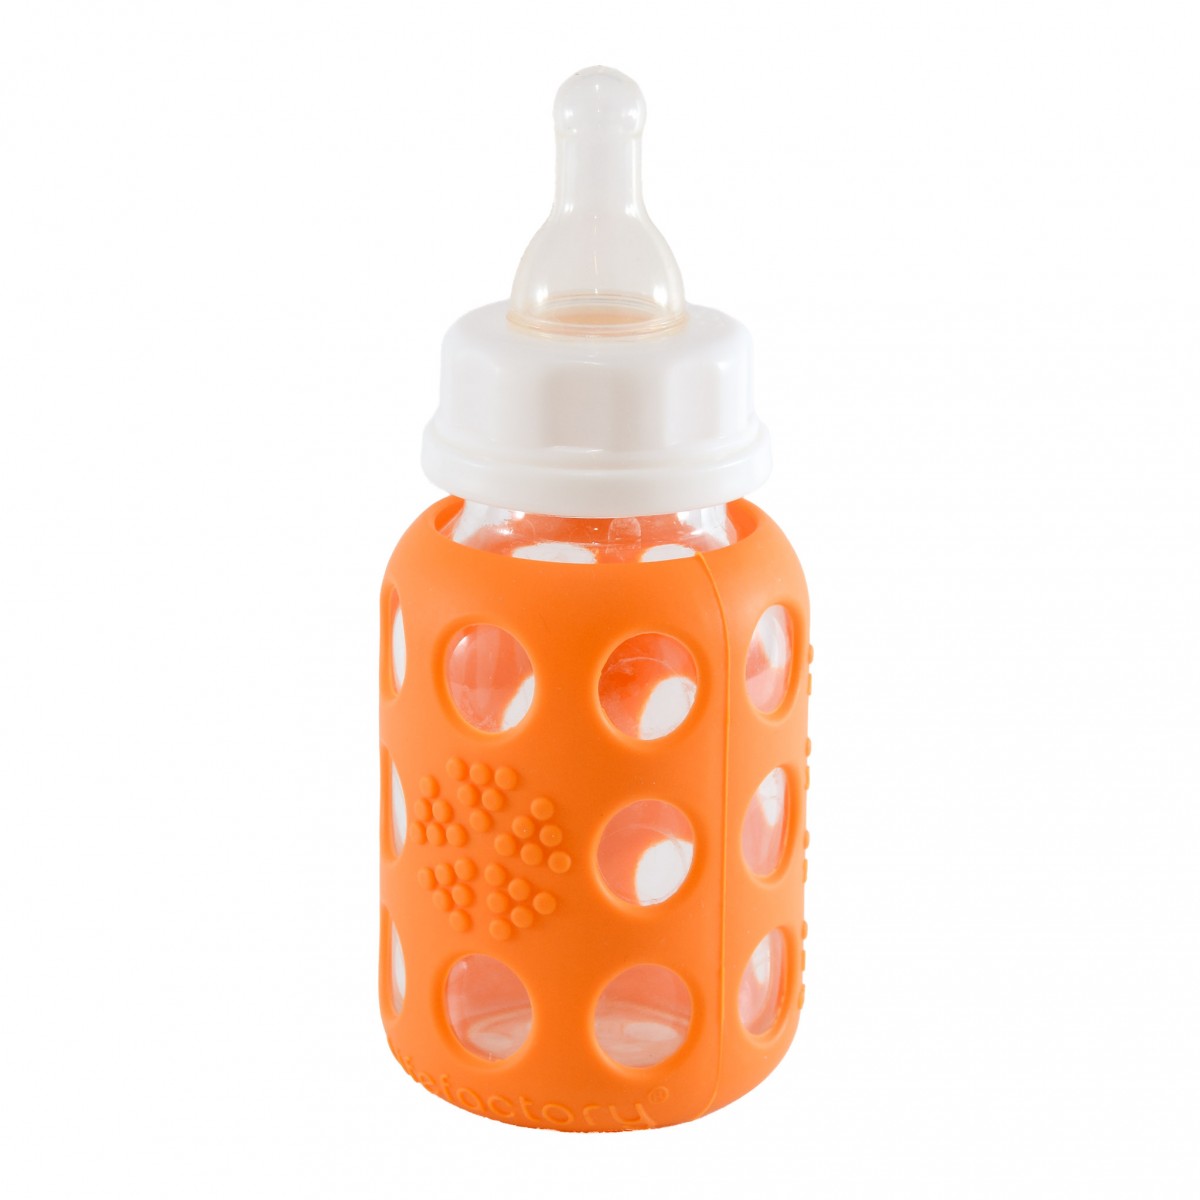 8oz Glass Baby Bottle with Silicone Sleeve